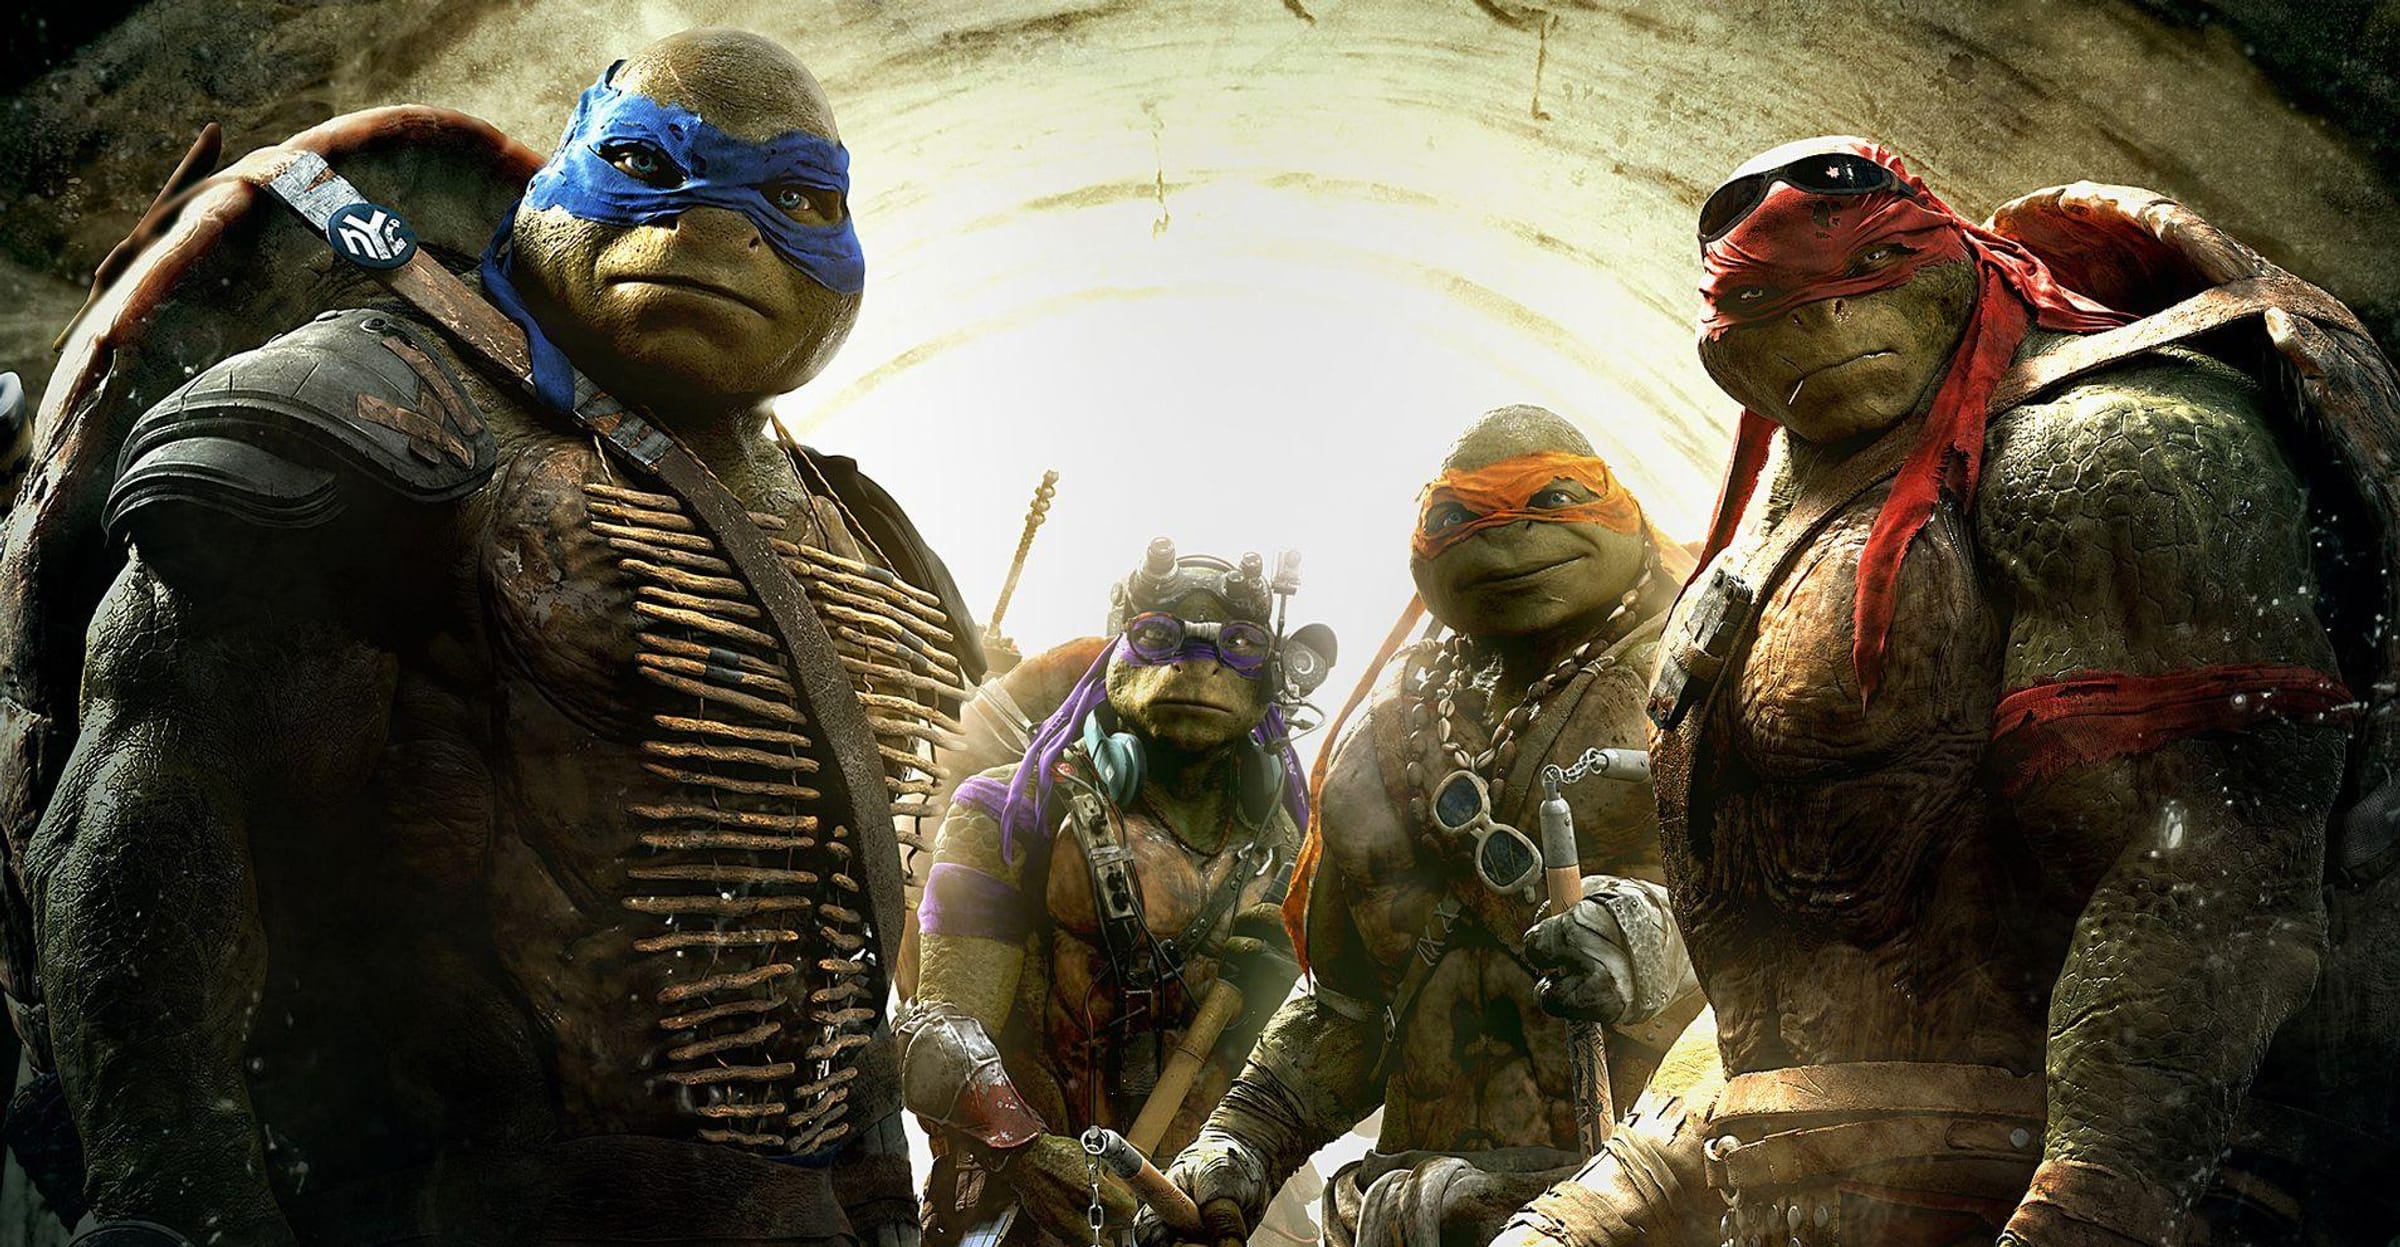 The Origins of The Ninja Turtles Is WAY Darker Than You Know